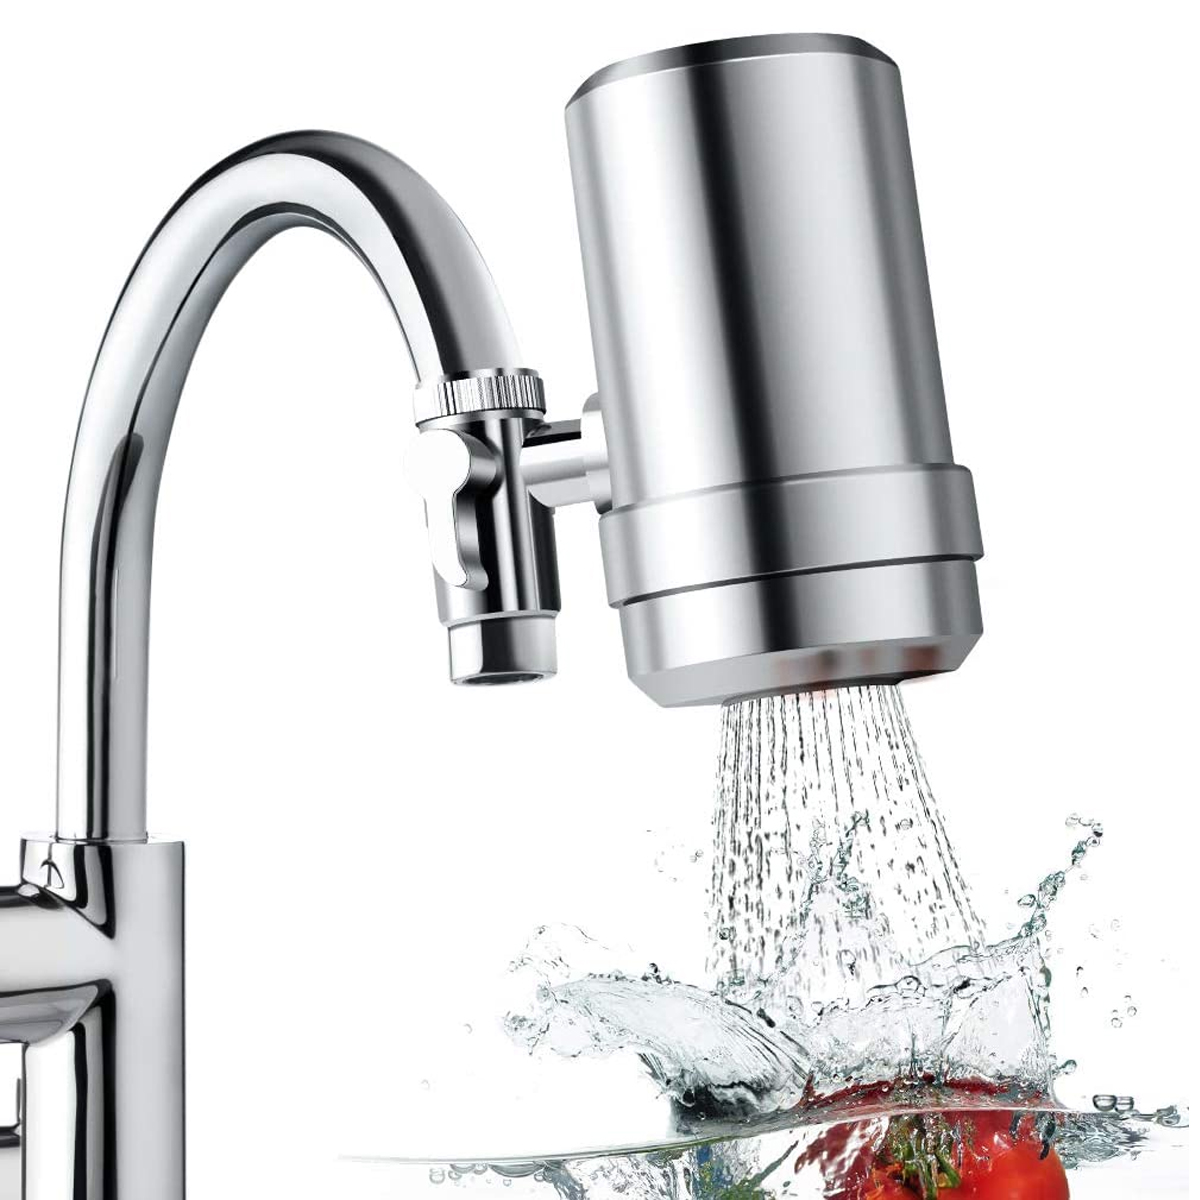 Household Faucet Water Tap Kitchen Purifier Filtration Hot/Cold Water Filter